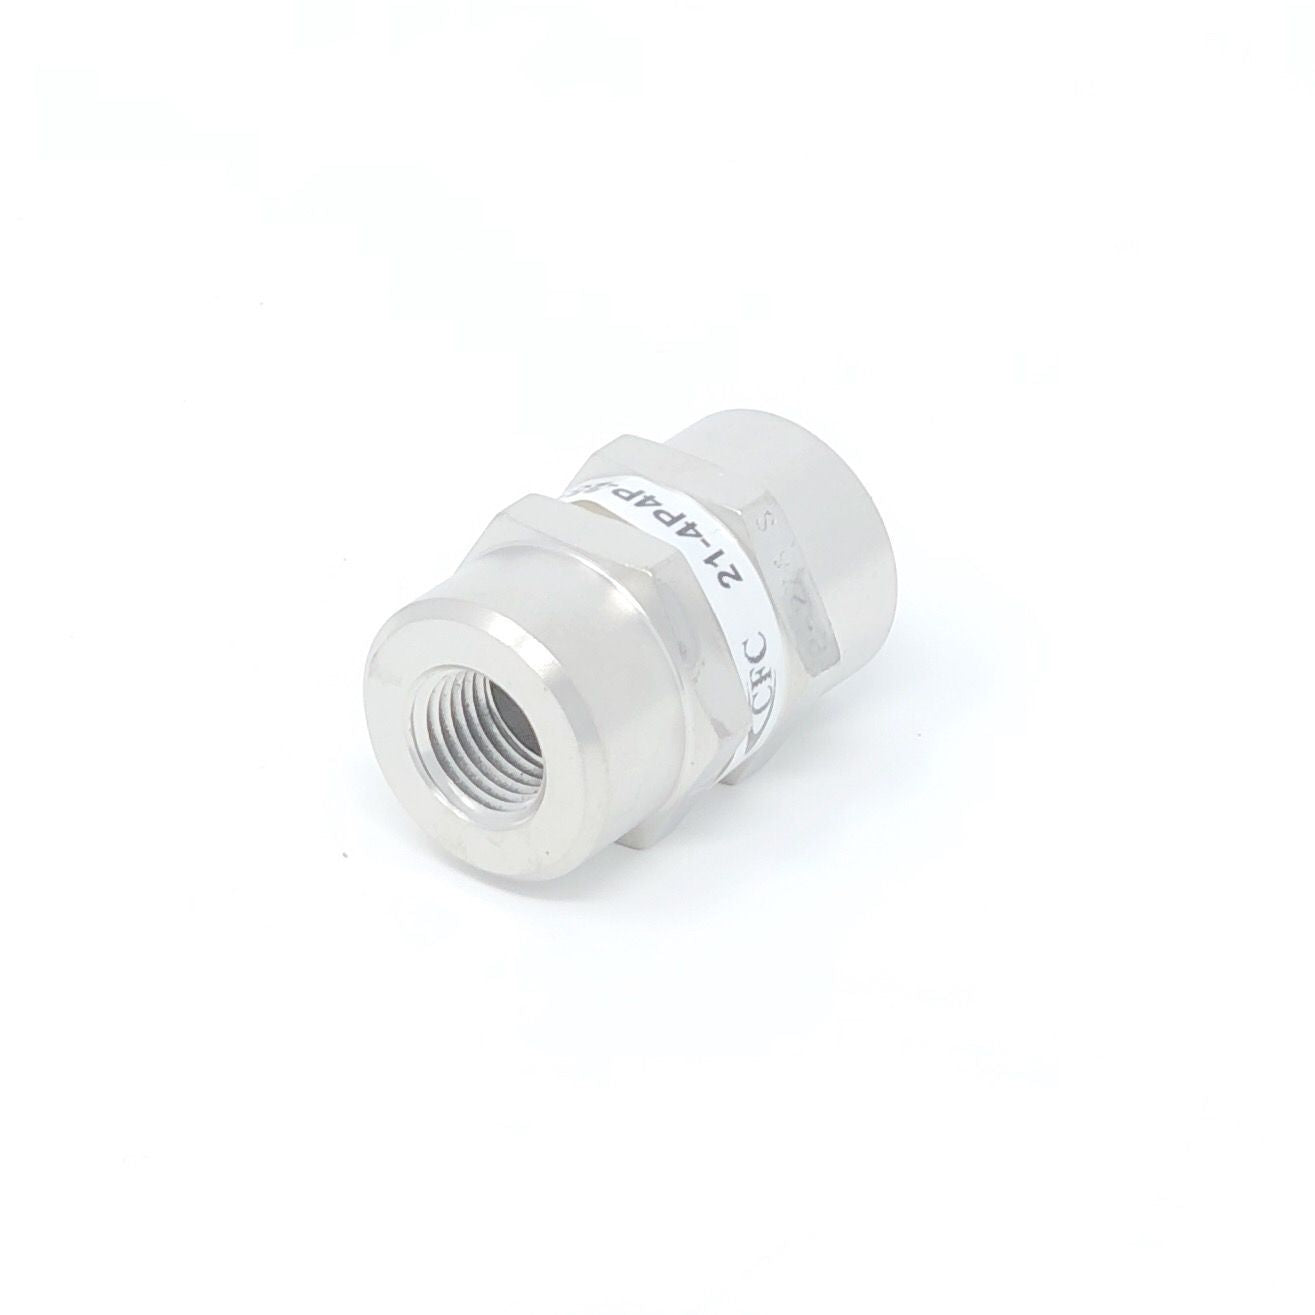 21-8N8N-10S : Chase High Pressure Inline Filter, 3000psi, 1/2" NPT, 10 Micron, No Visual Indicator, No Bypass